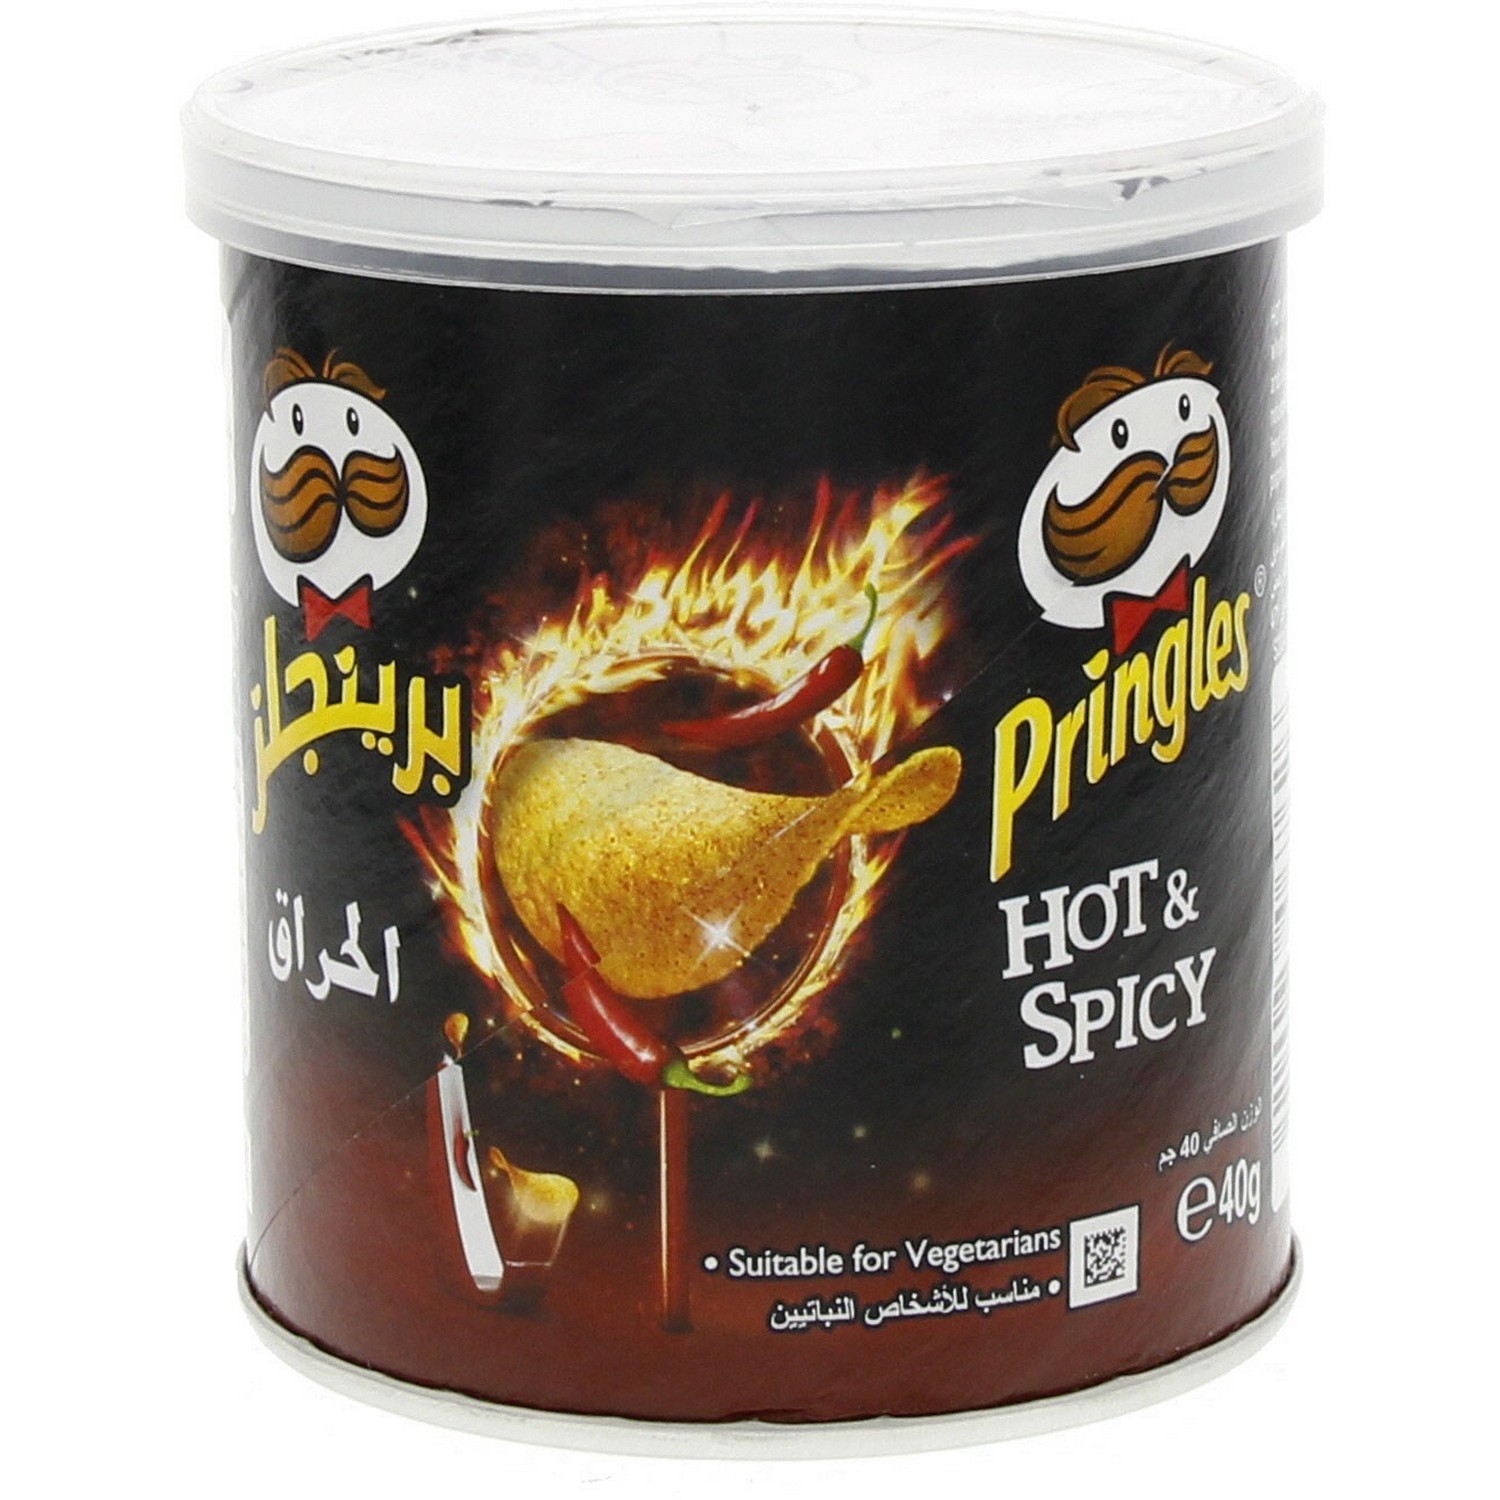 Pringles Hot Spicy Chips | escapeauthority.com